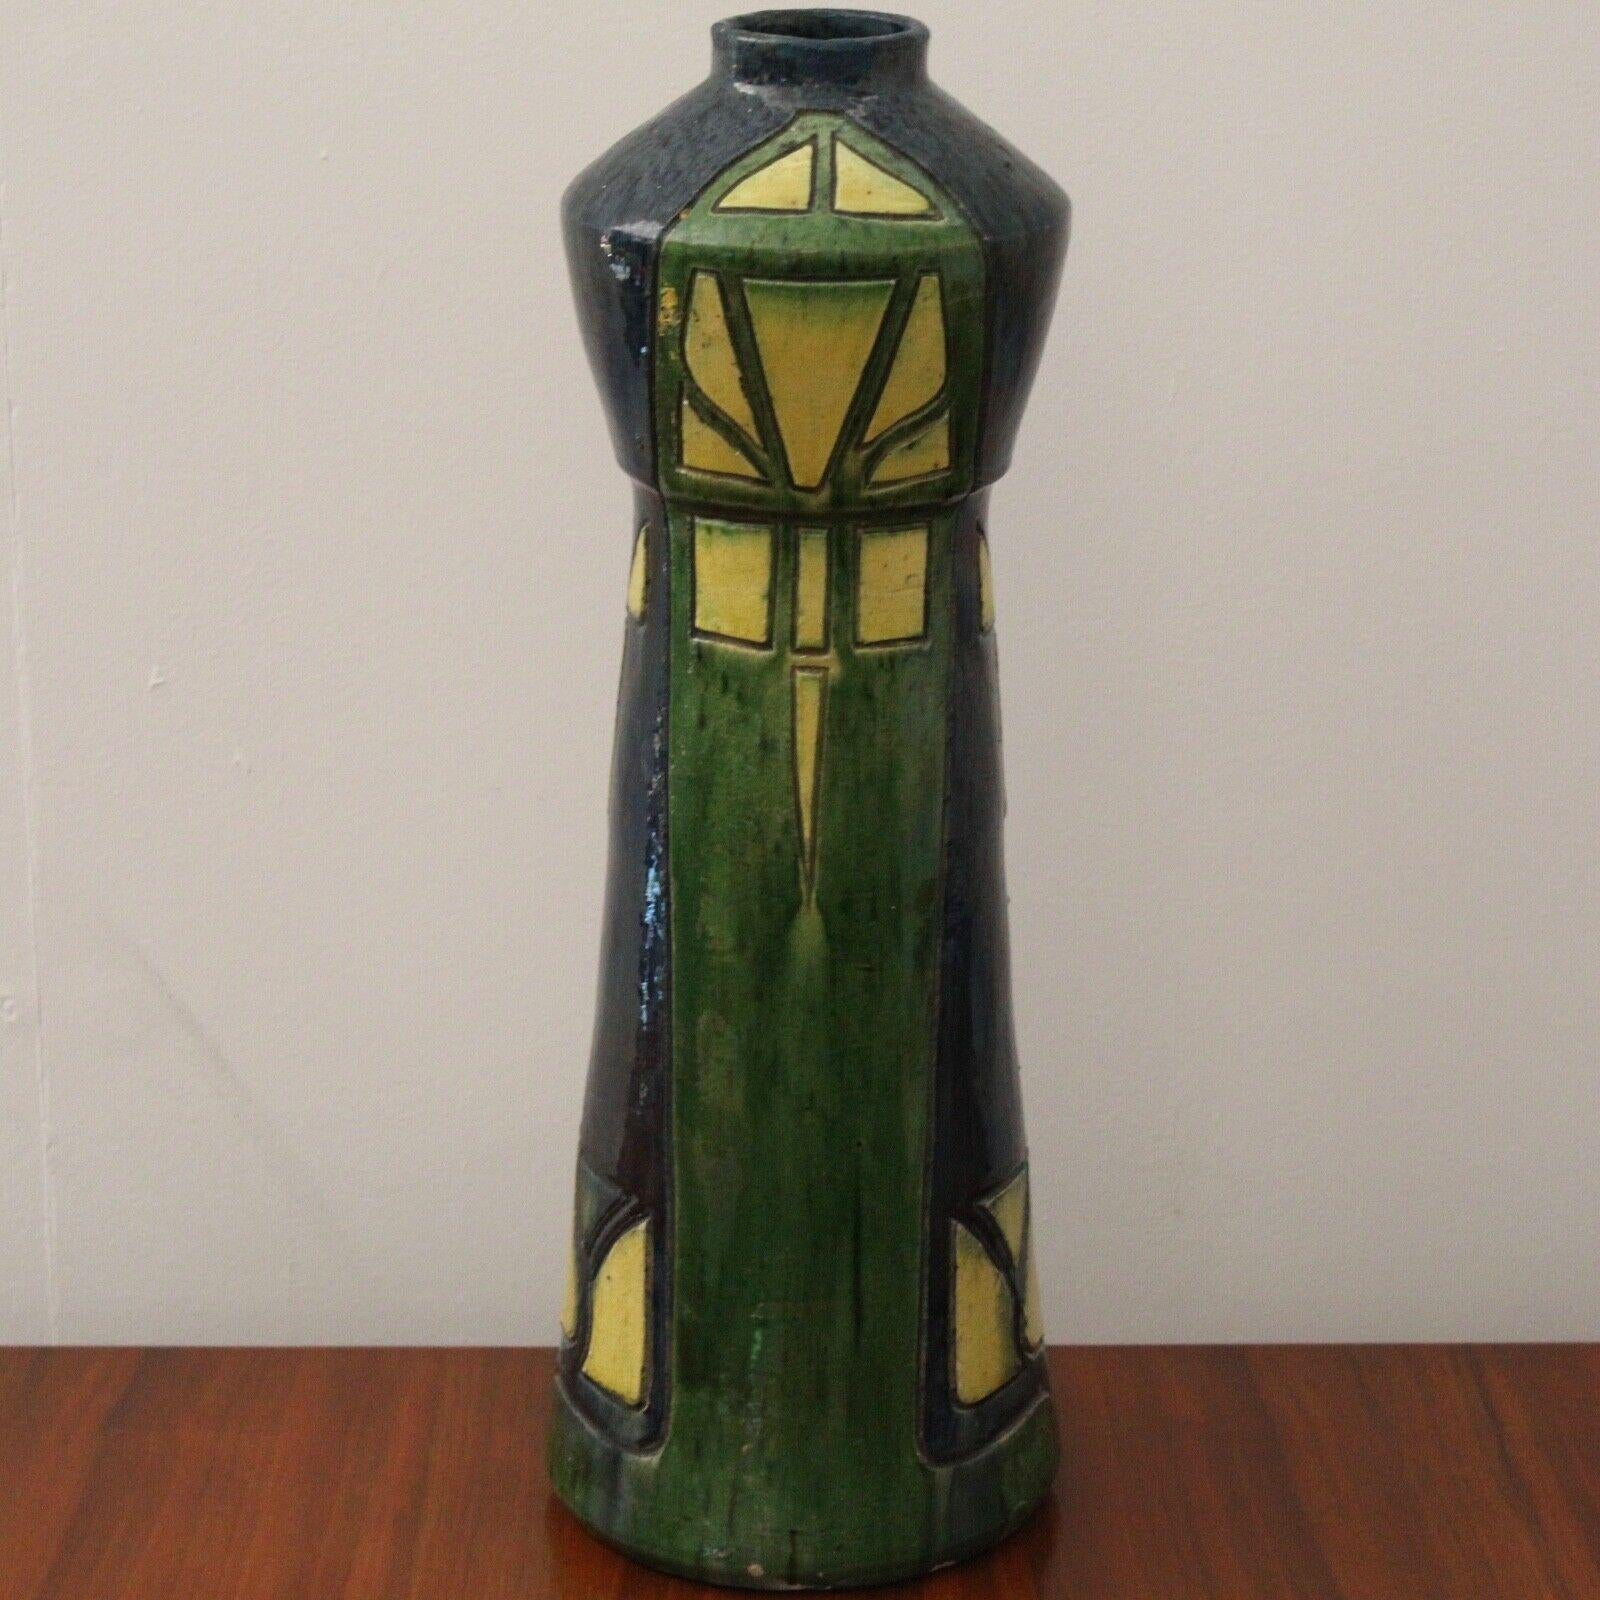 This is a very beautiful Art Nouveau vase painted with deep blues, green and bright yellow. 

Lovely piece in excellent antique condition with no chips or cracks.
   